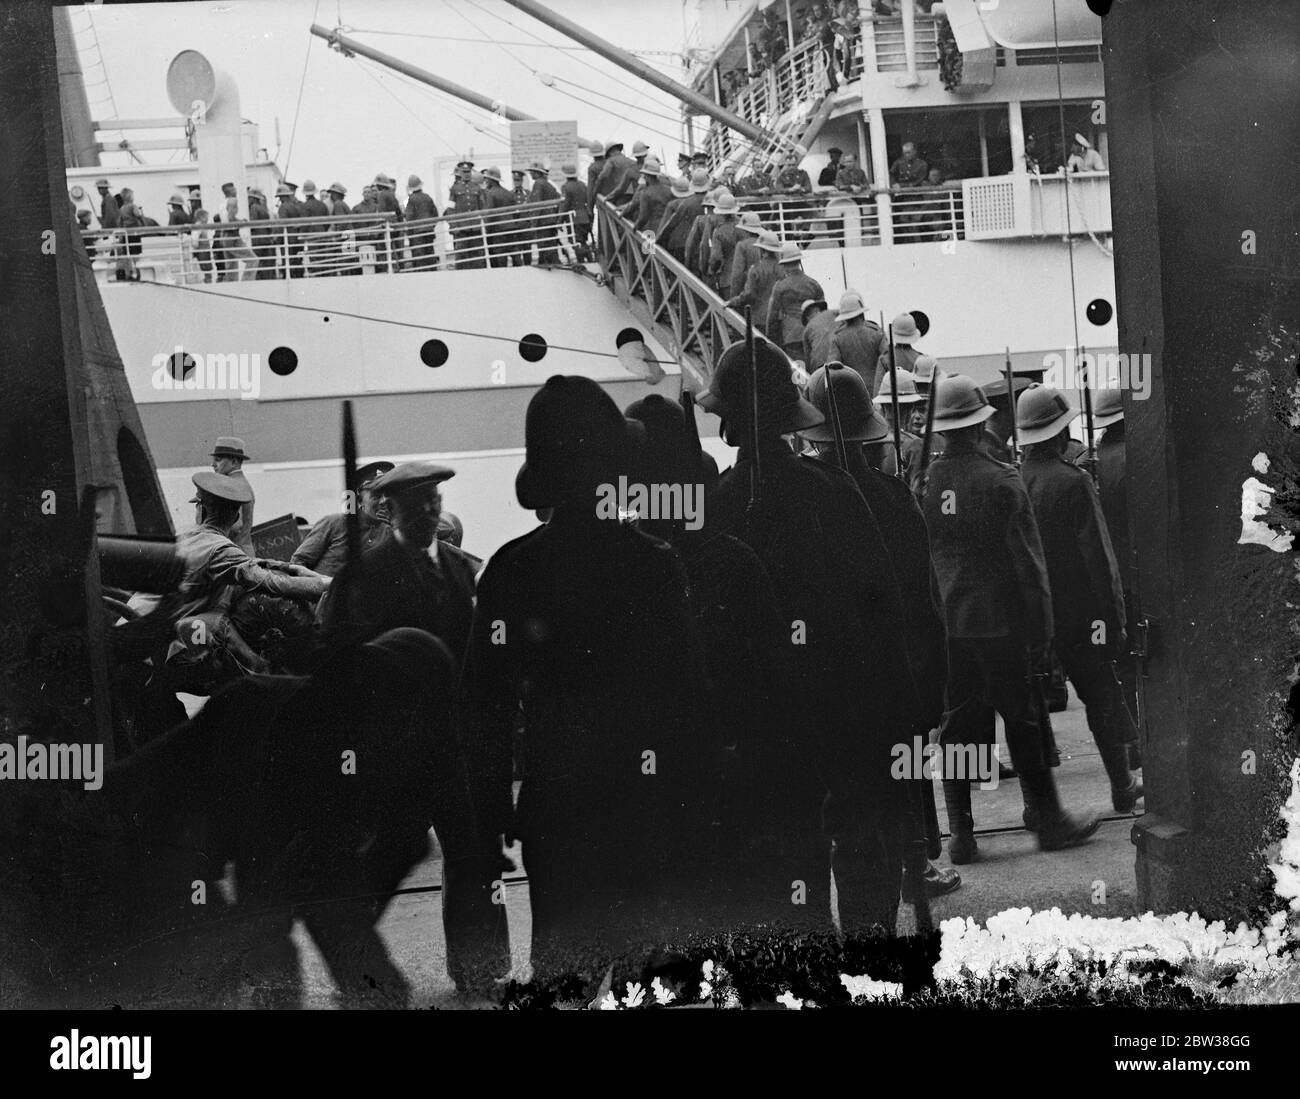 First troopship of the season . The first troopship of the season to leave Southampton was the SS Neuralia . She is taking a battalion of the Royal Berkshire regiment and other detachments to Bombay . Photo shows , troops going aboard the SS Neuralia at Southampton . 7 September 1934 Stock Photo